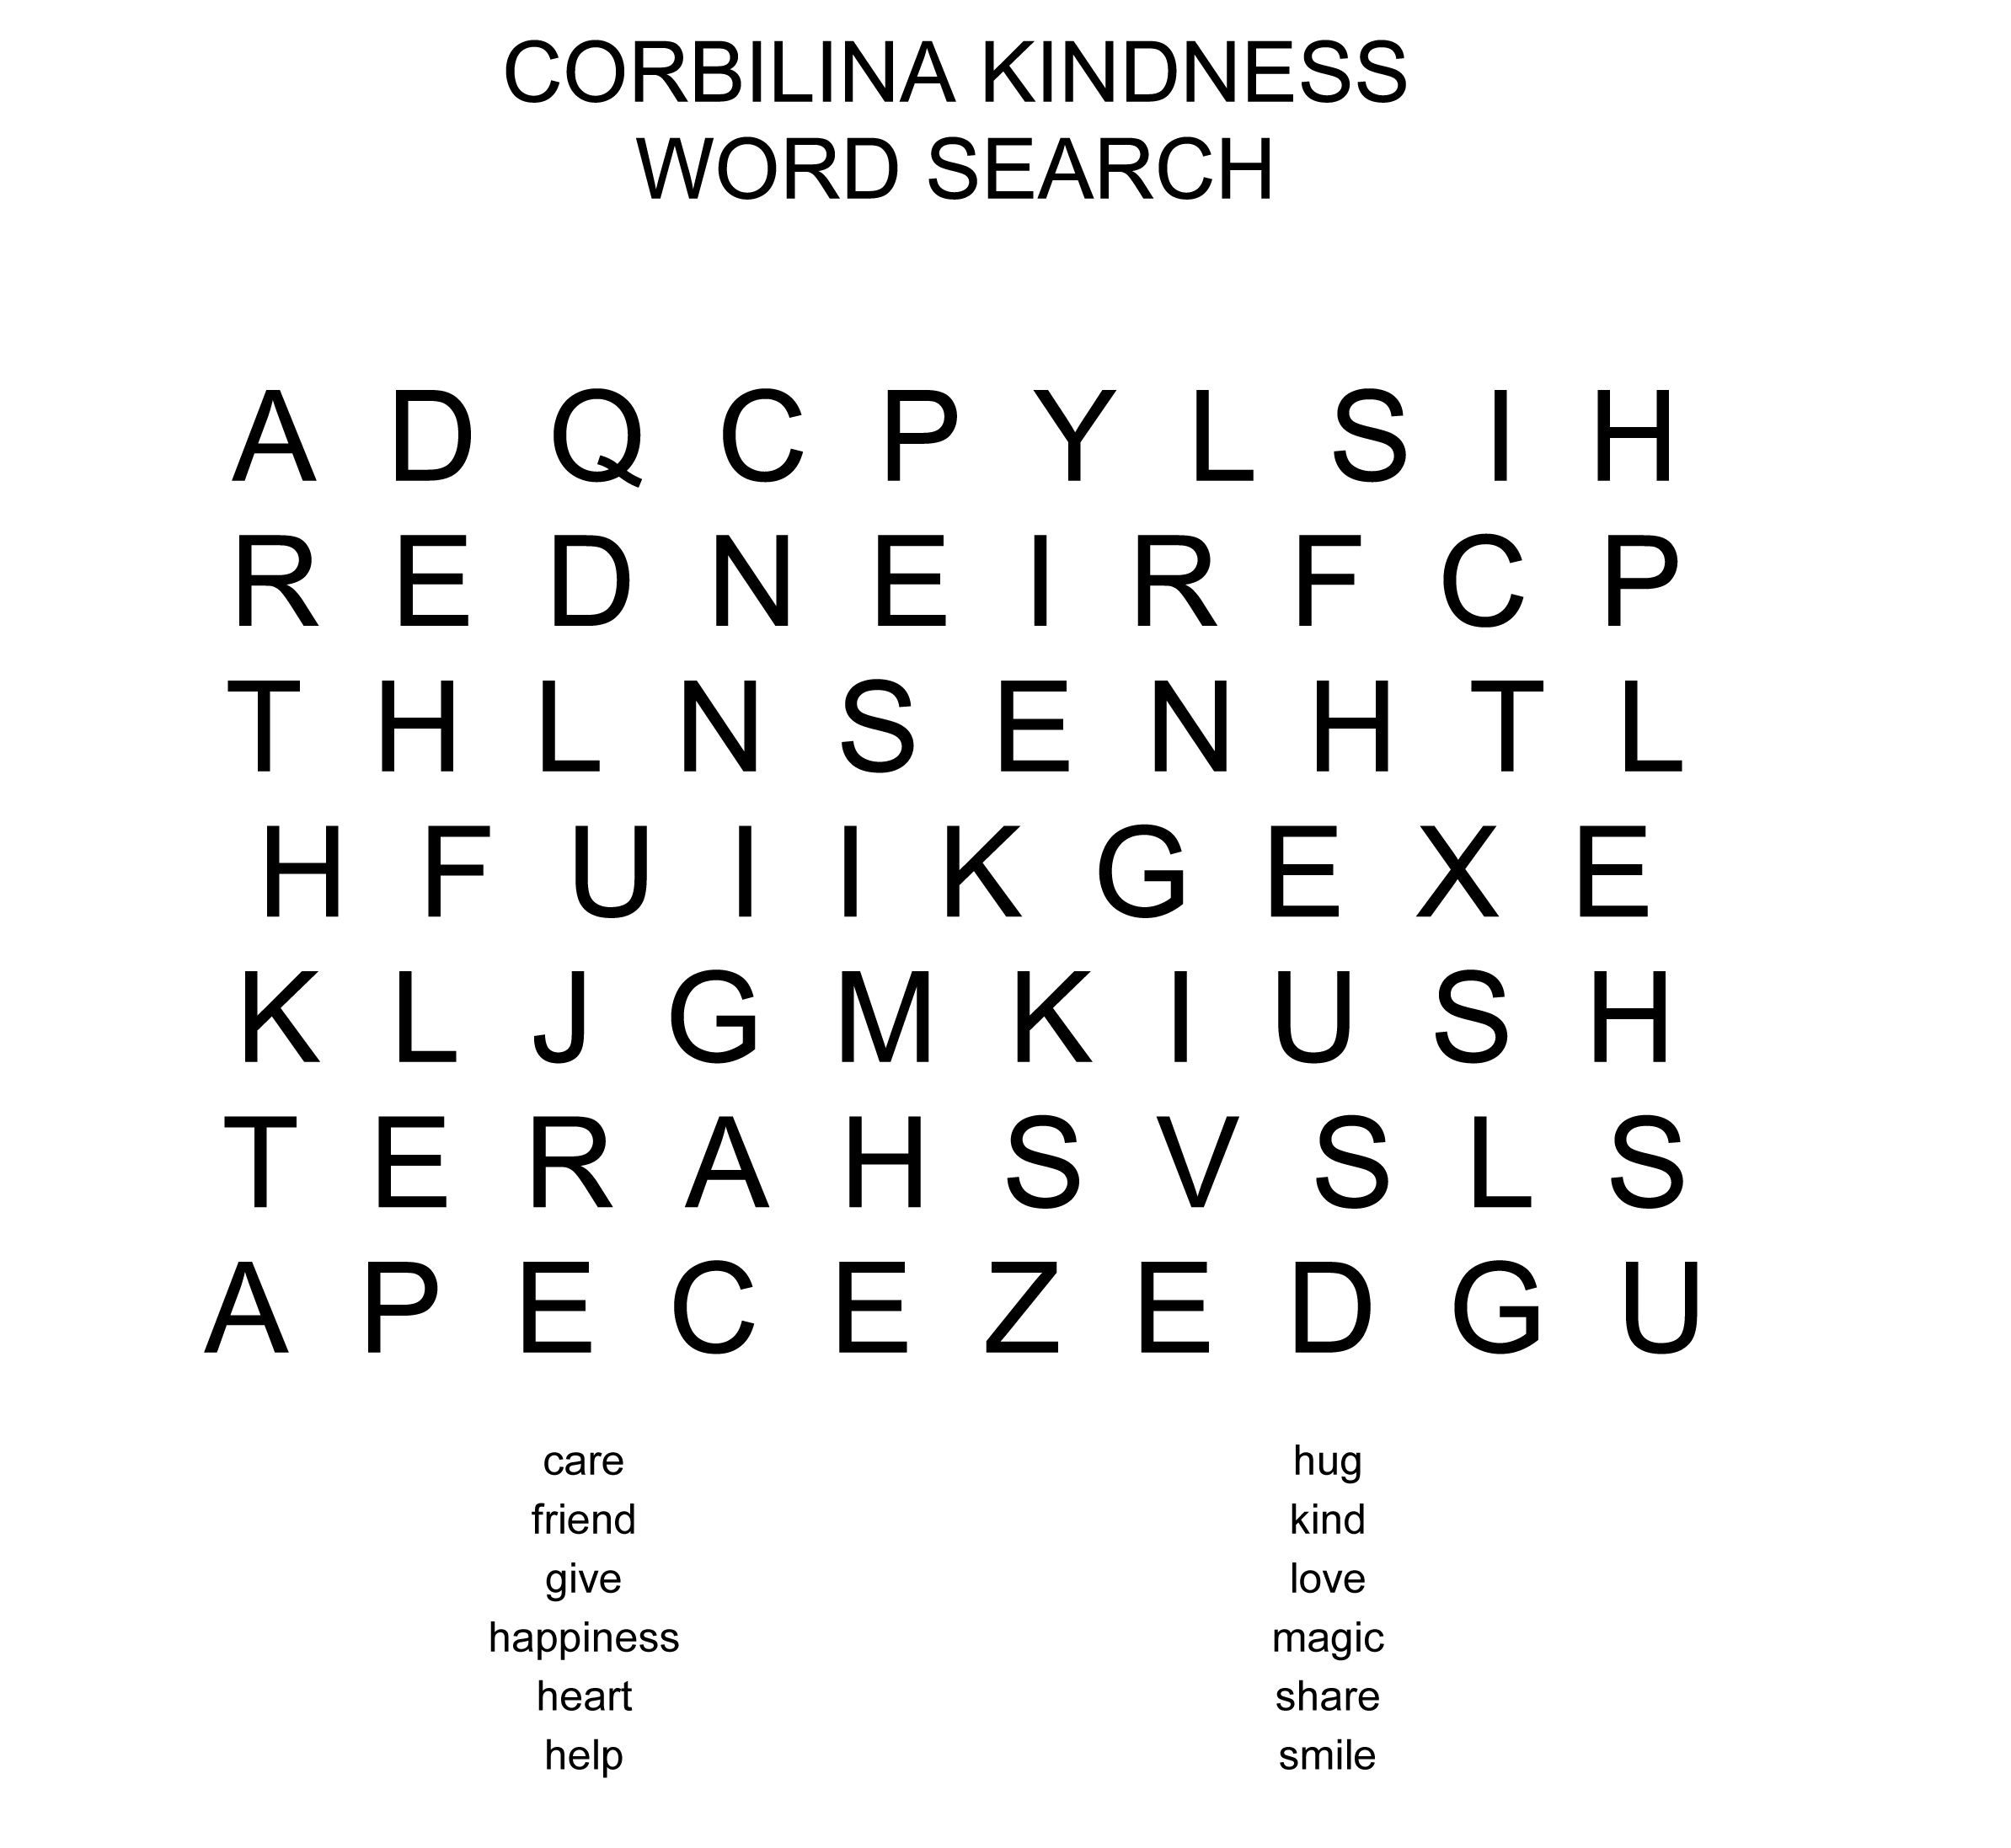 Basic Kindness Word Search Words Kindness Helpful